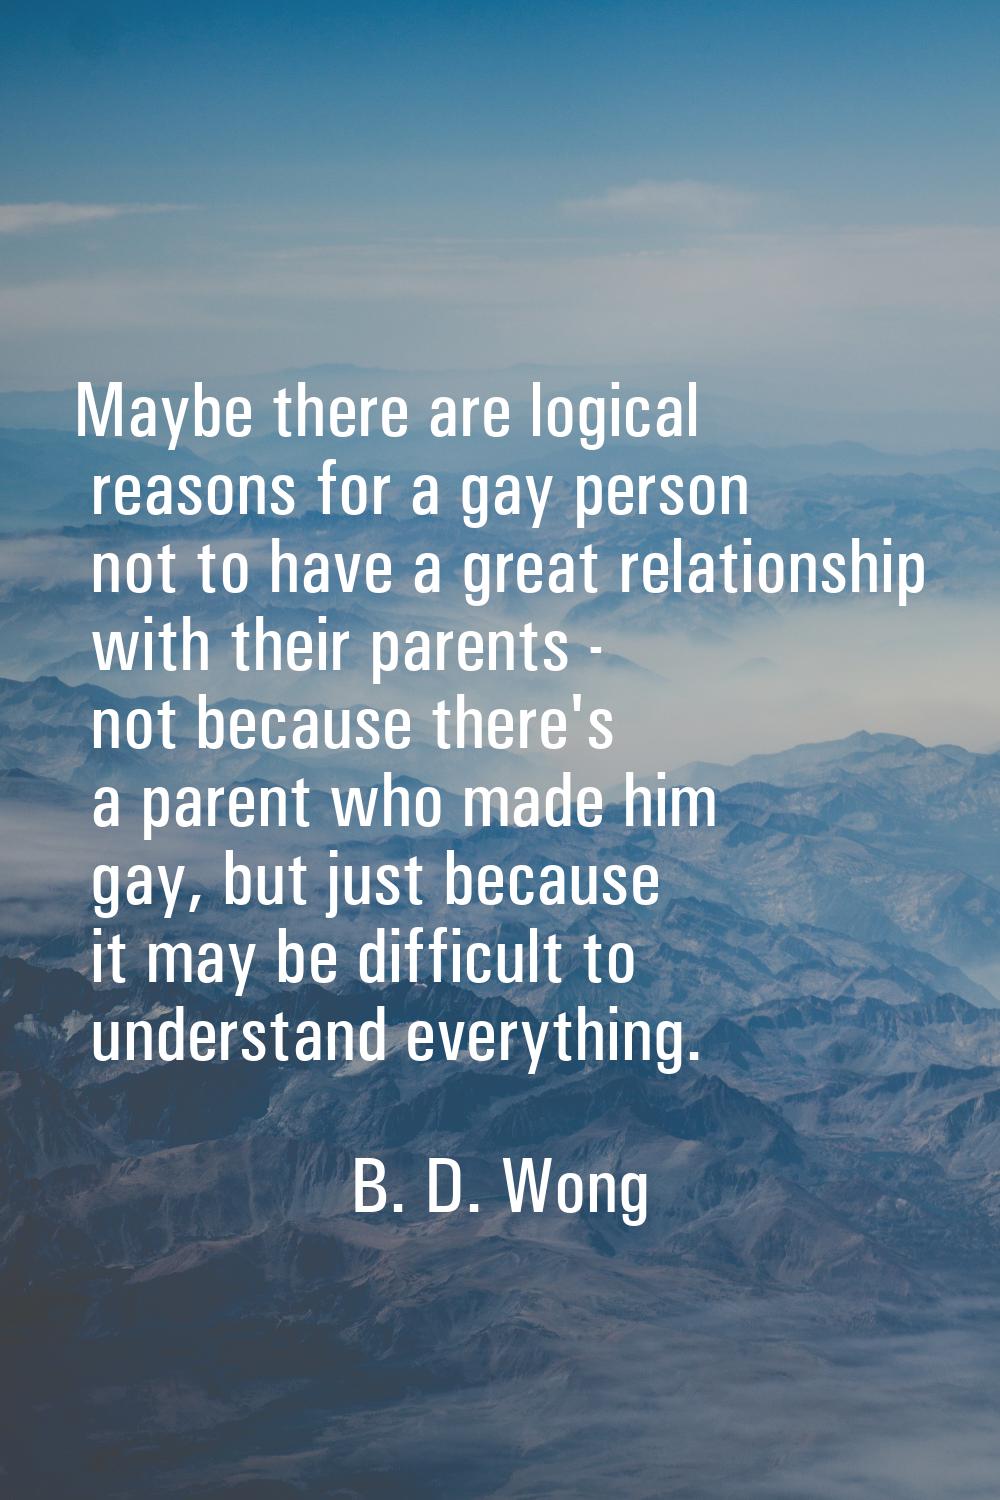 Maybe there are logical reasons for a gay person not to have a great relationship with their parent